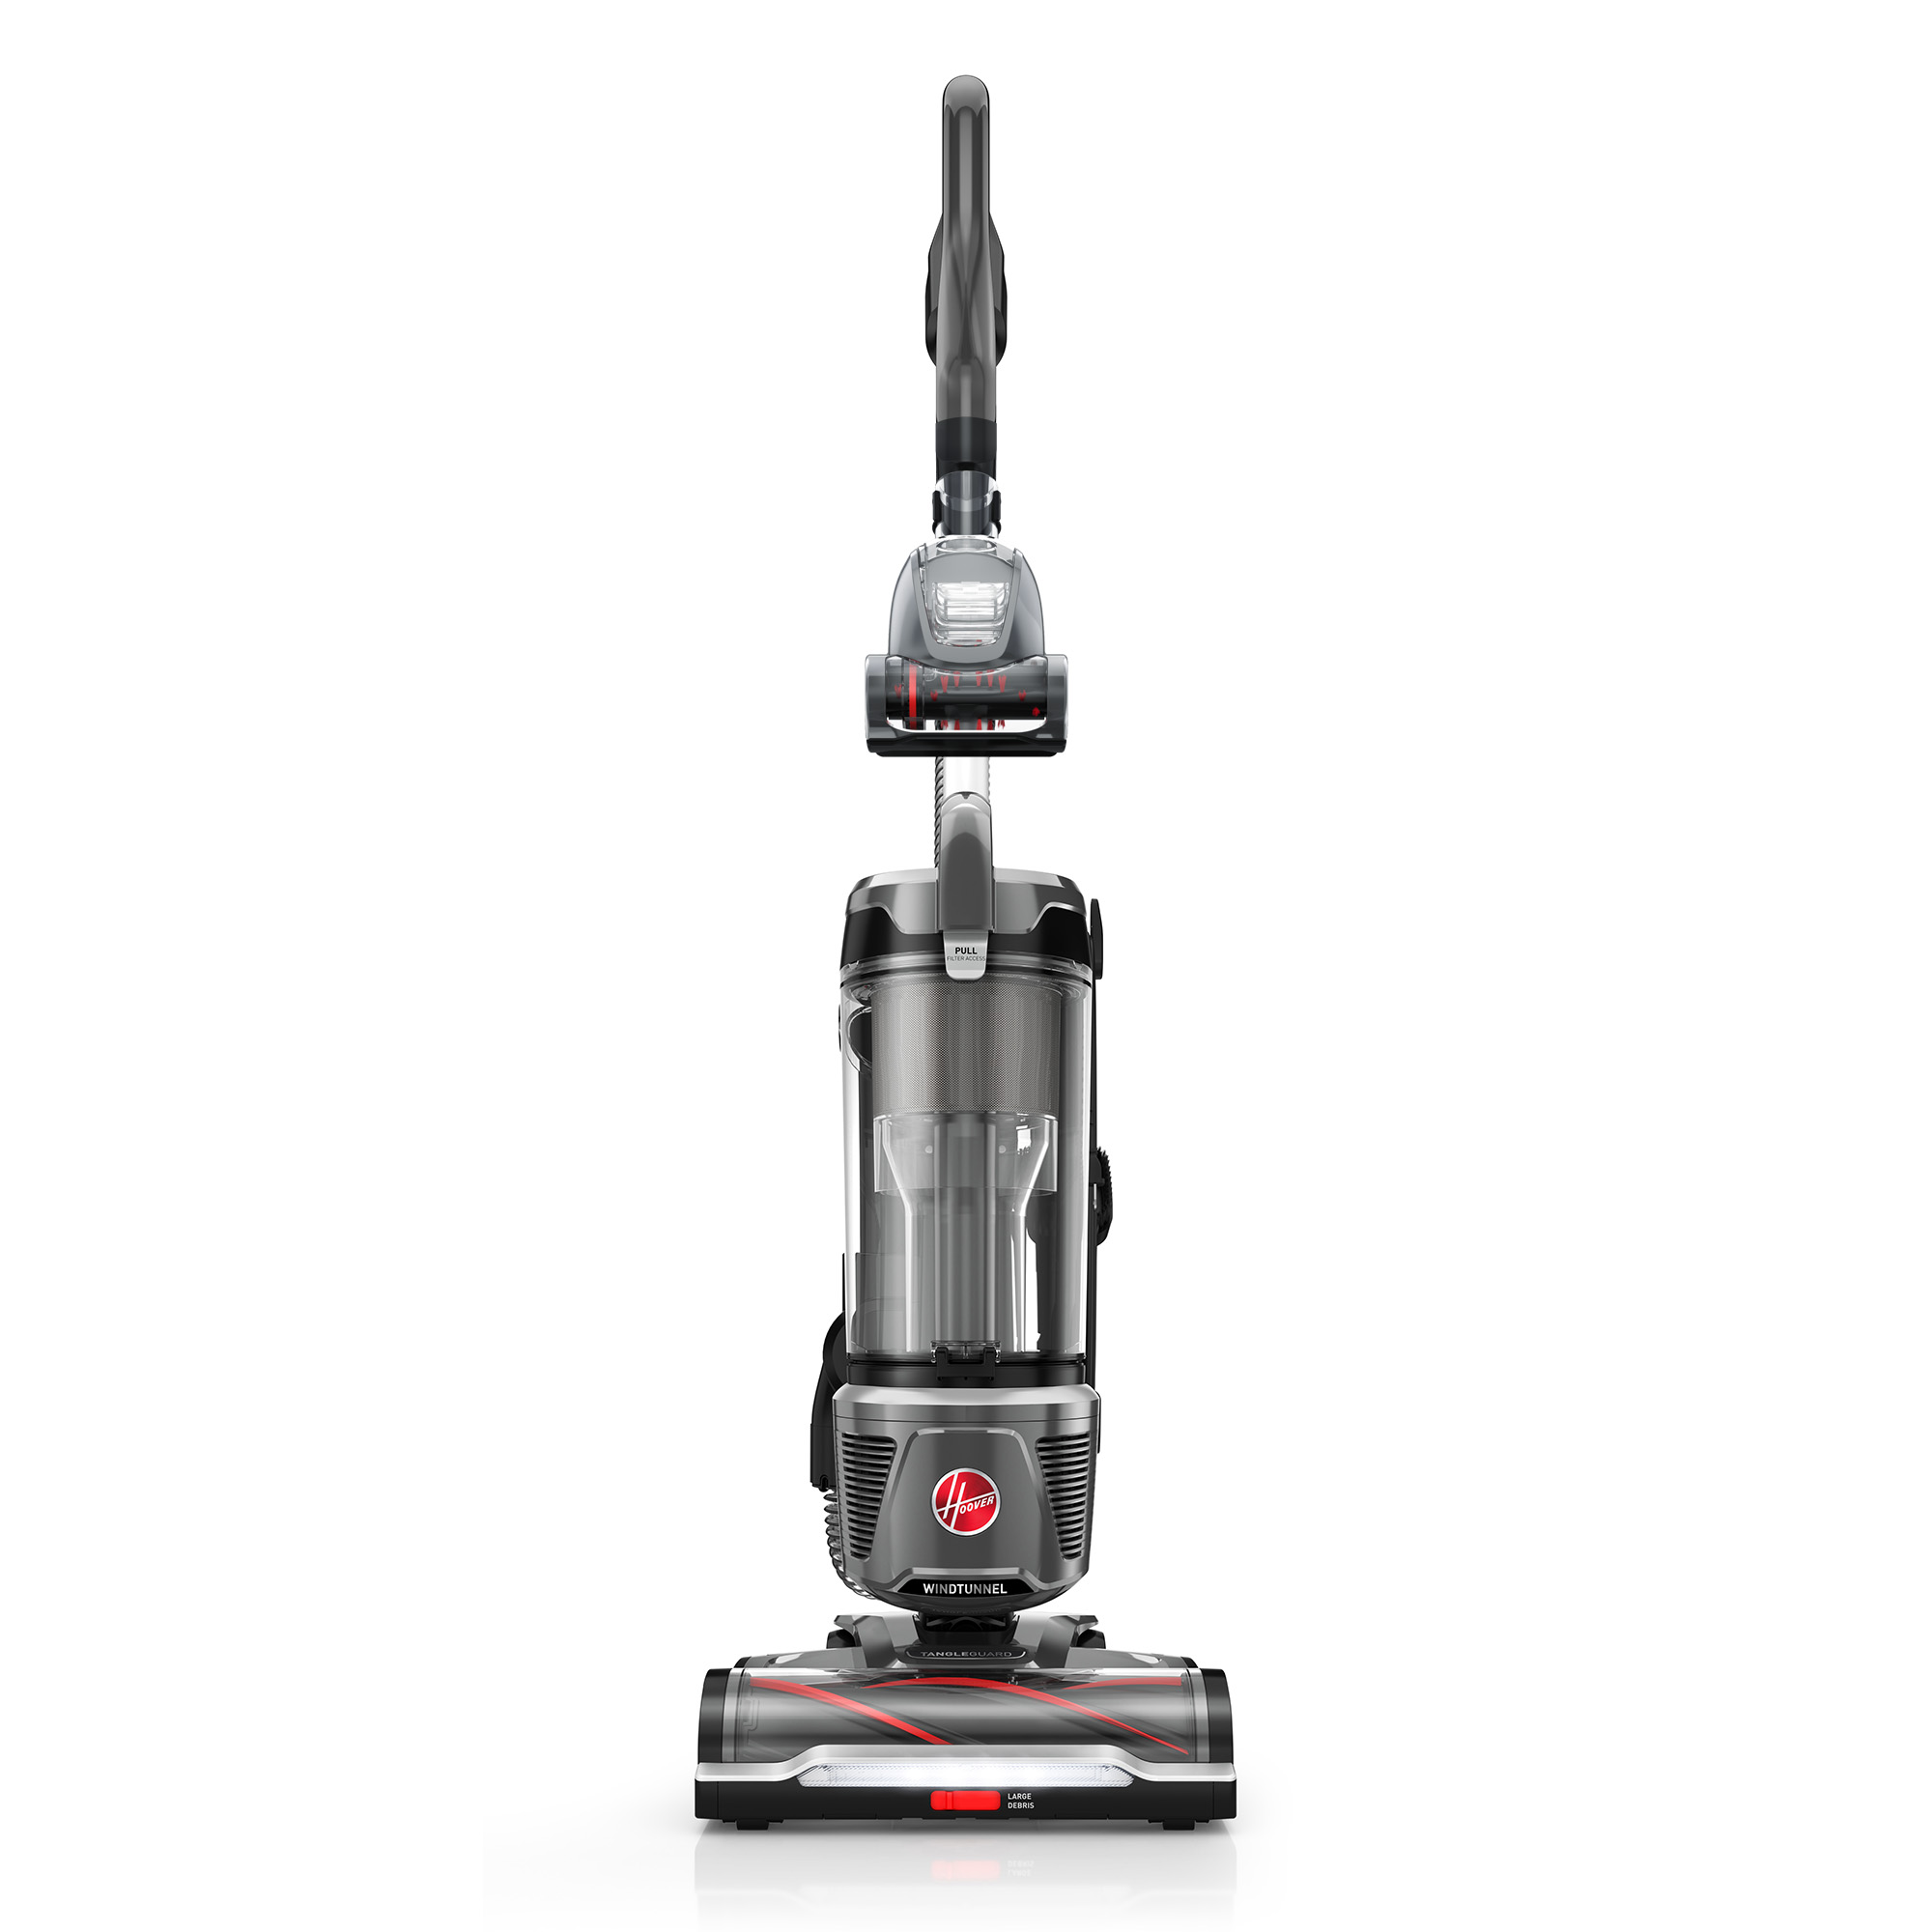 Hoover WindTunnel Tangle Guard Bagless Upright Vacuum Cleaner, UH77110, New - image 1 of 7